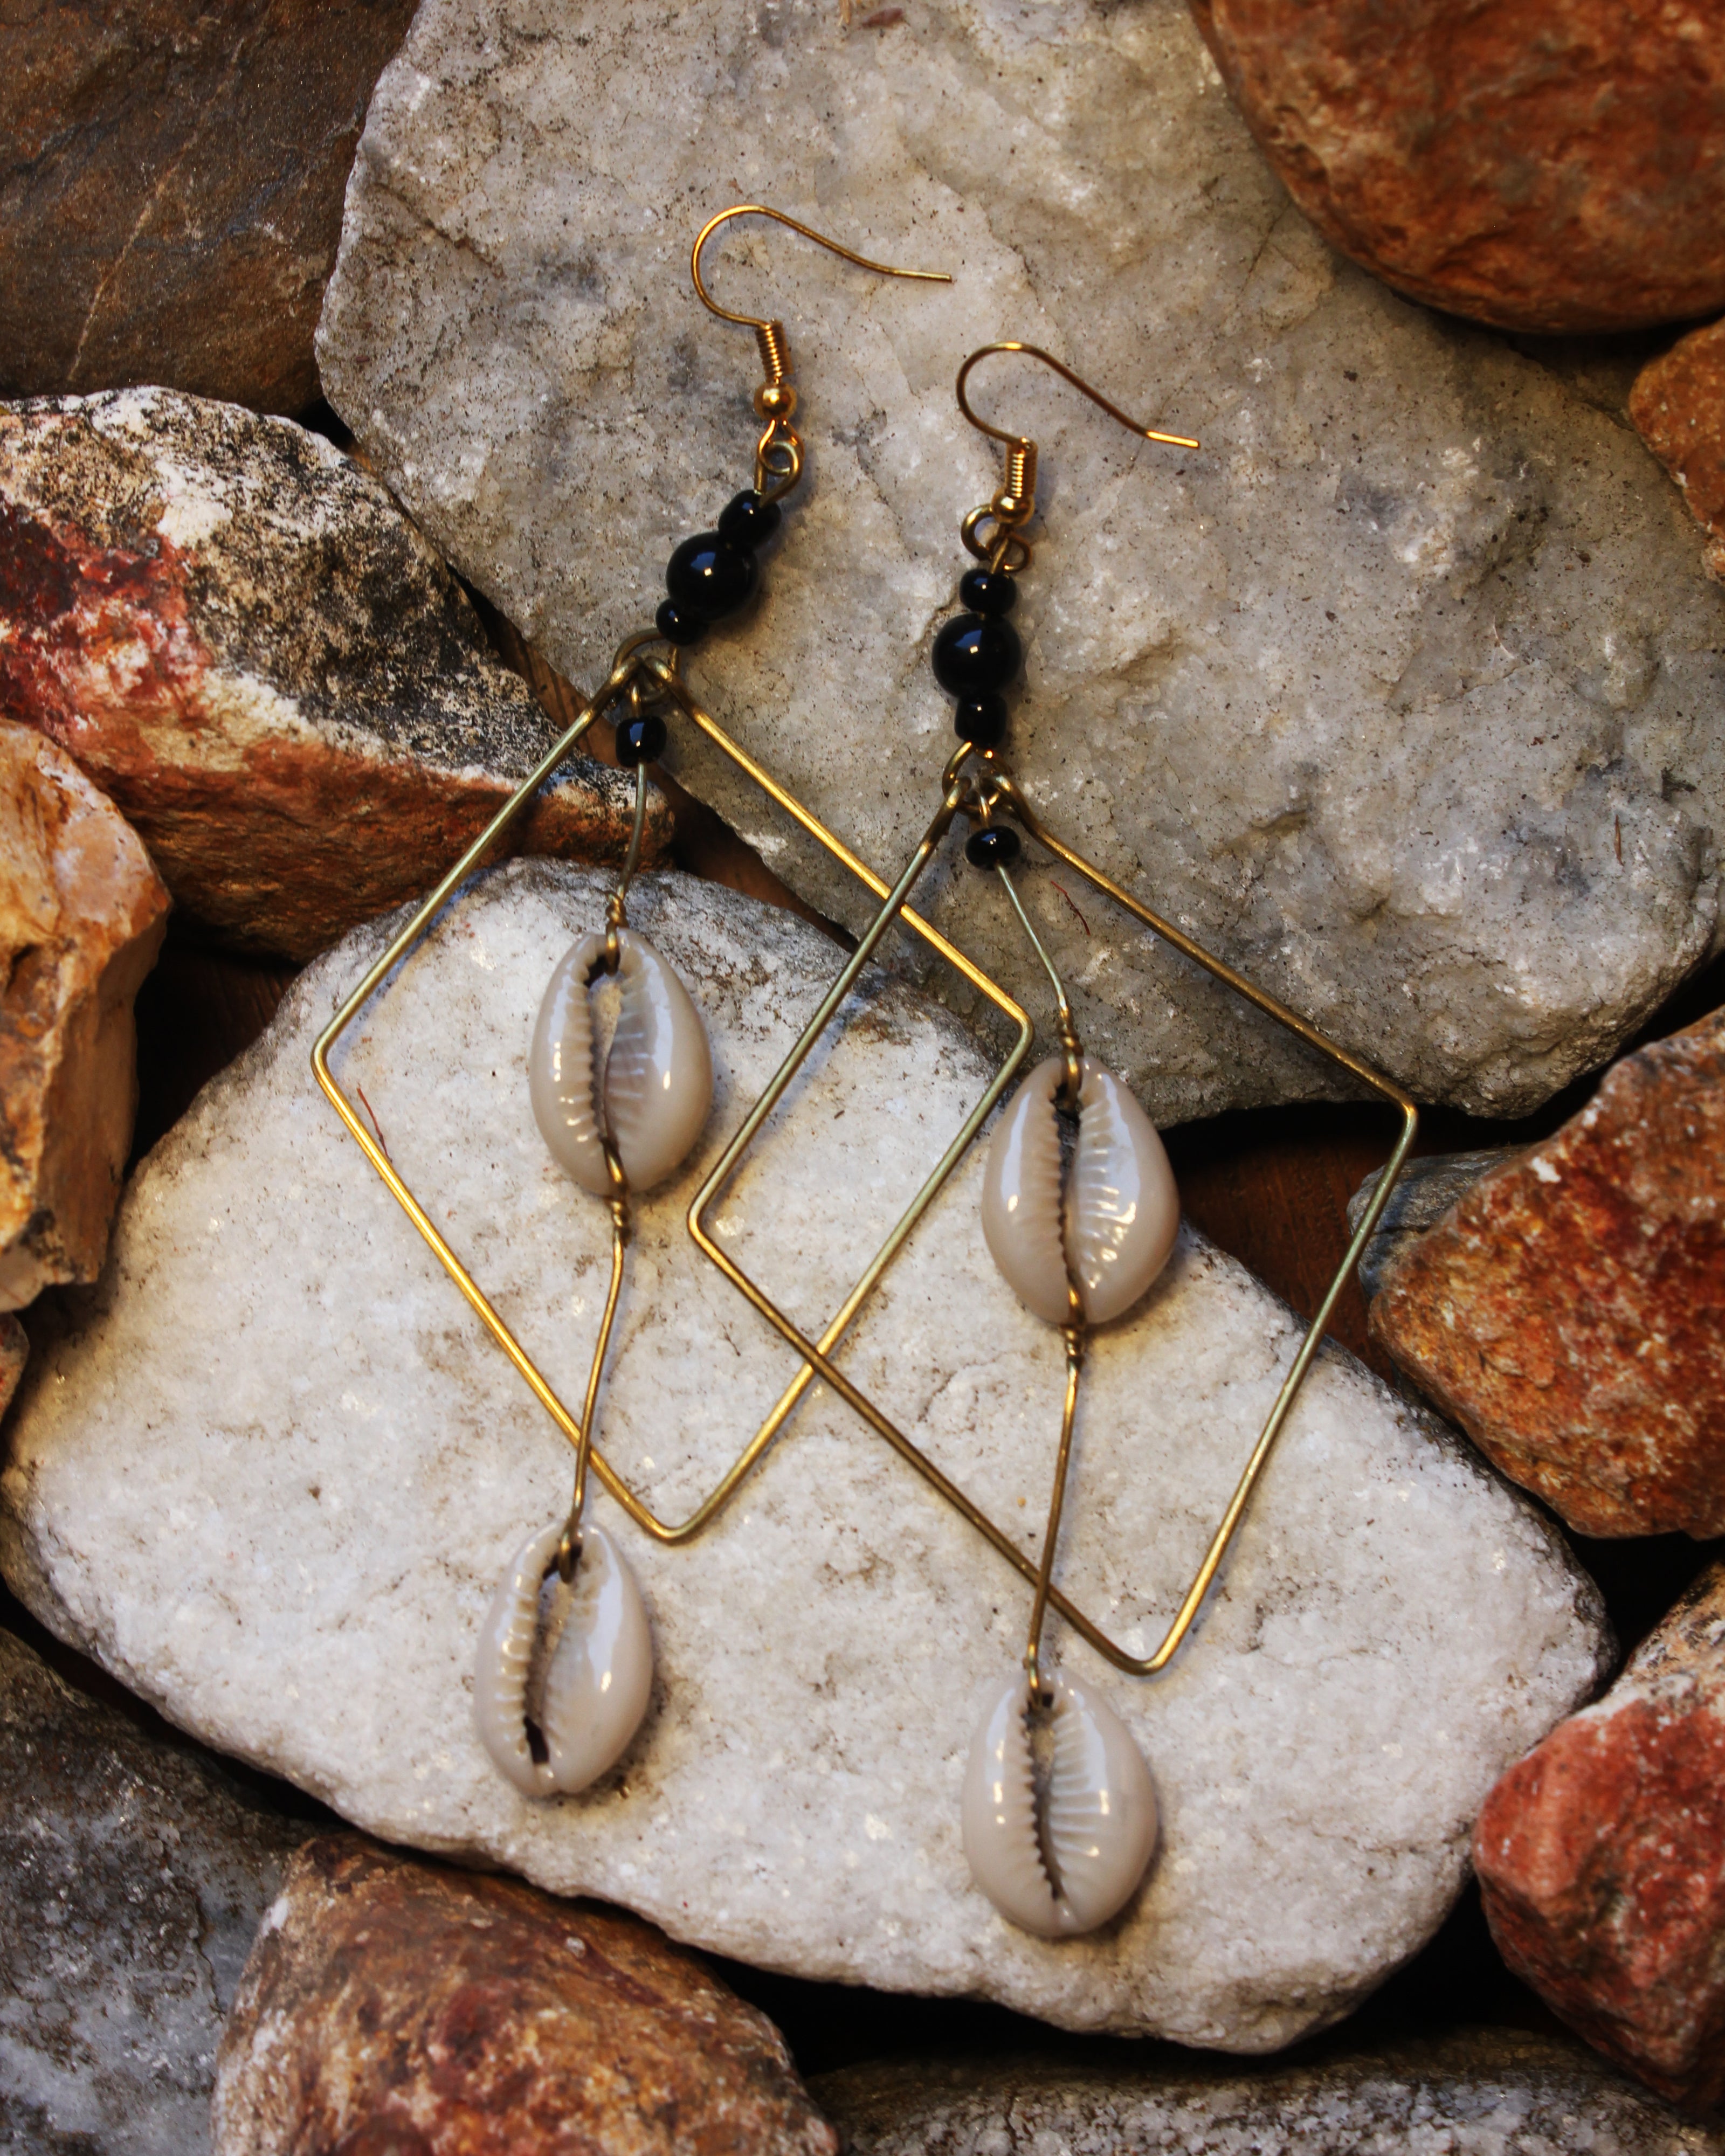 Brass Diamond-shaped earrings with a Cowry Shell Pendant and Black Beads